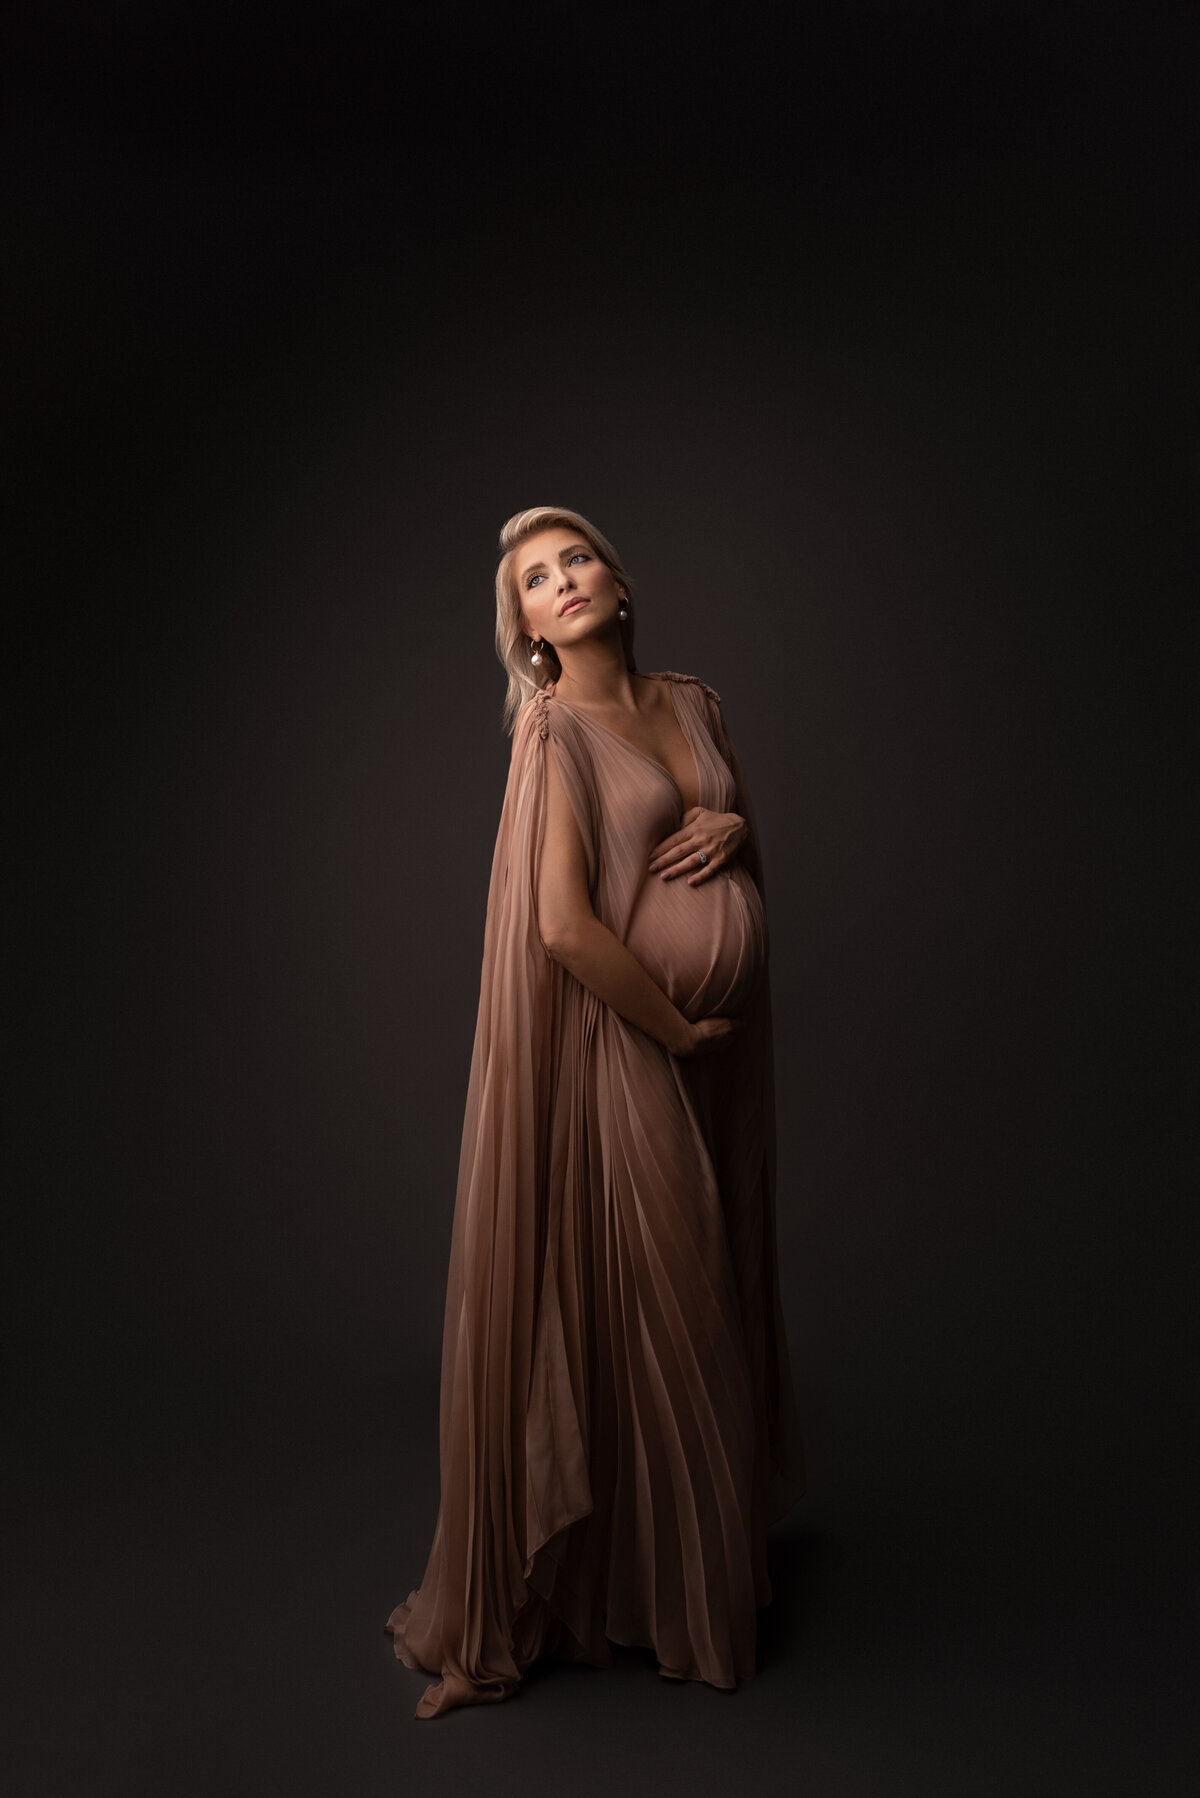 Woman poses for fine art maternity photos with New Jersey's best maternity photographer Katie Marshall. Woman in long dusty rose maternity photoshoot gown with caped sleeves is standing angled to the camera. One hand is resting underneath her baby bump, the other overtop. She is looking over her shoulder to the light so her face is highlighted. Her body and bump are shadowed, creating dimension in the photo.